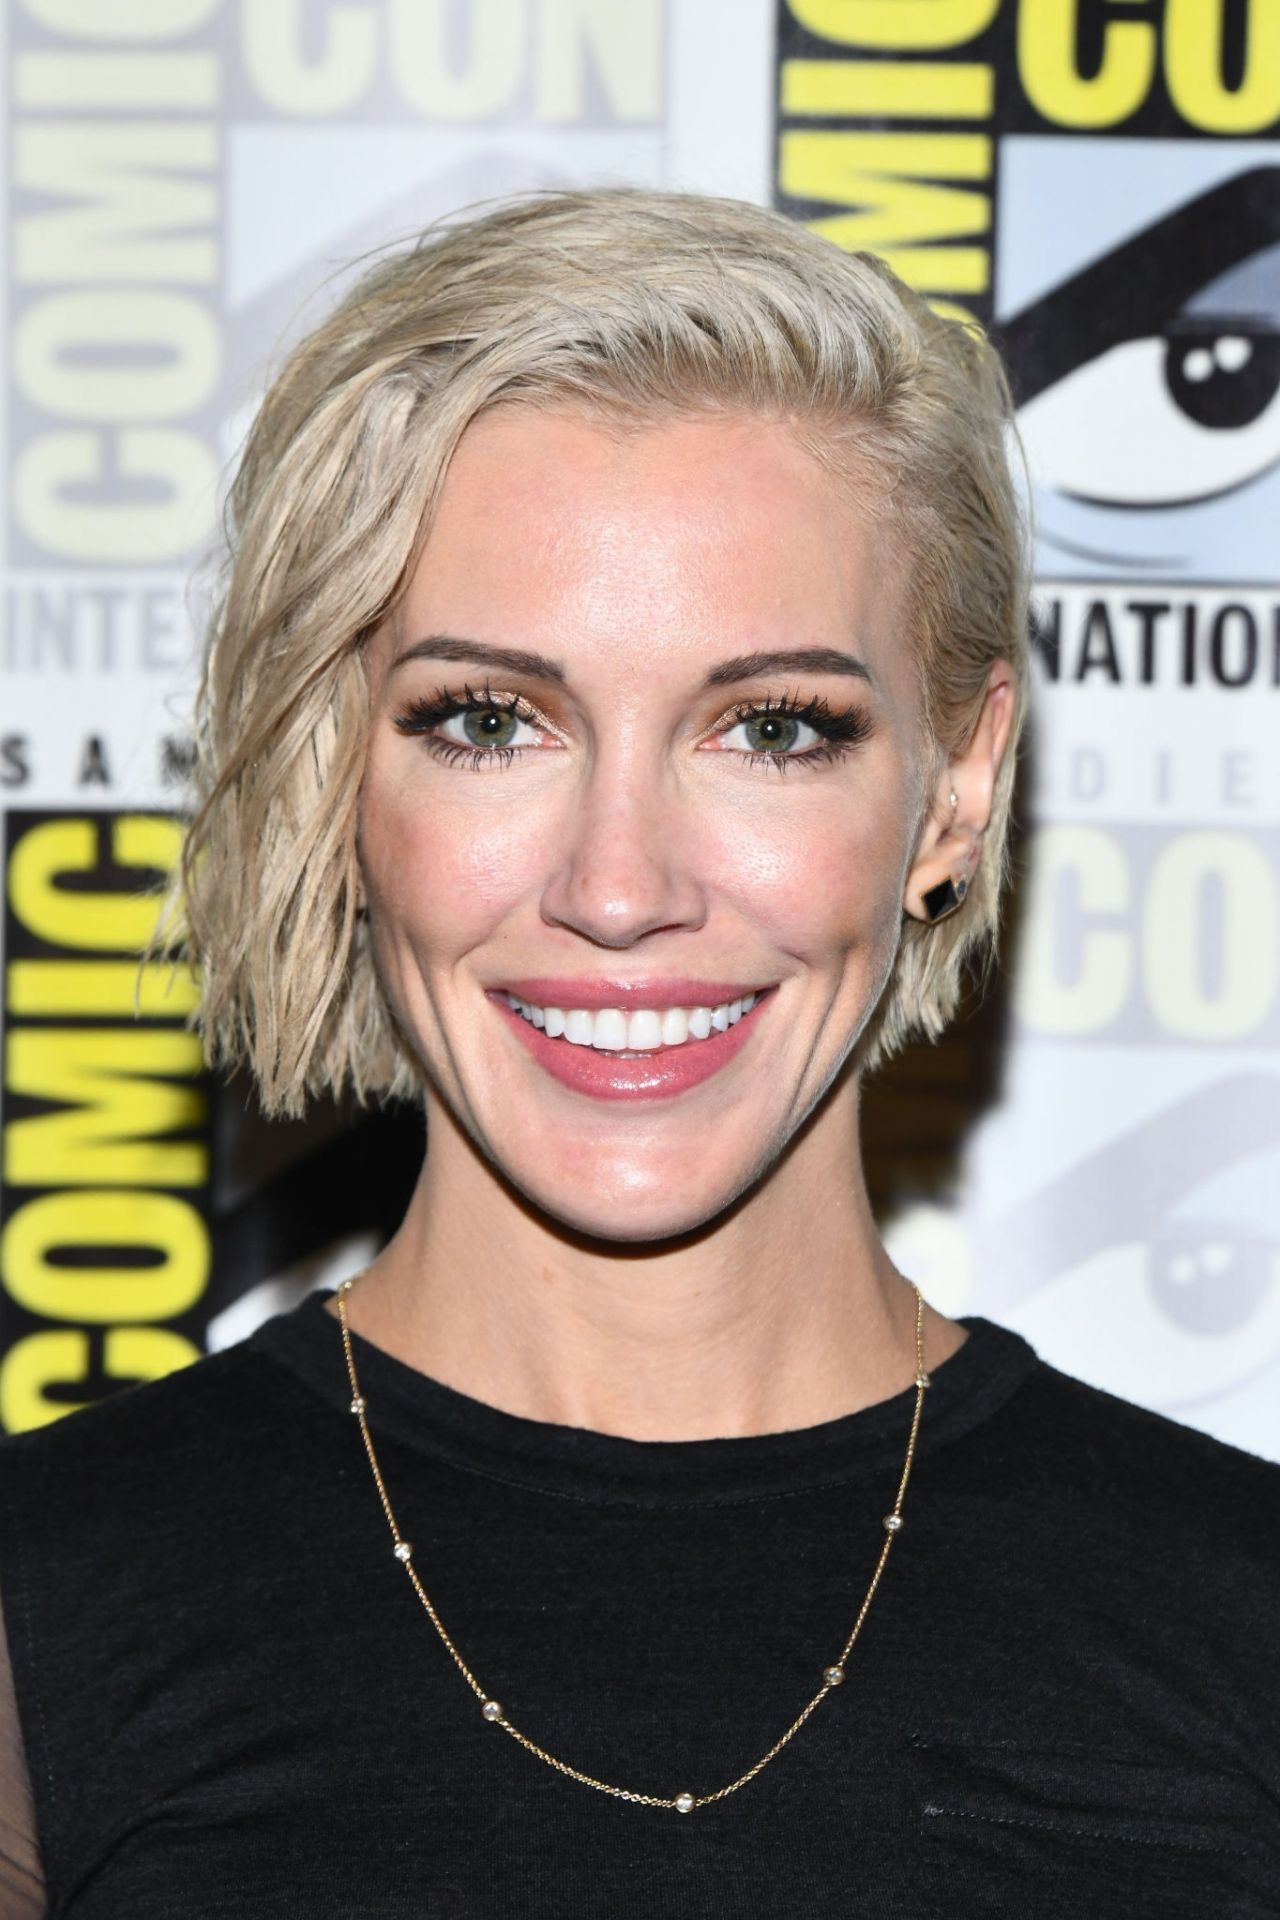 katie-cassidy-arrow-special-presentation-and-q-a-at-sdcc-2019-9.jpg